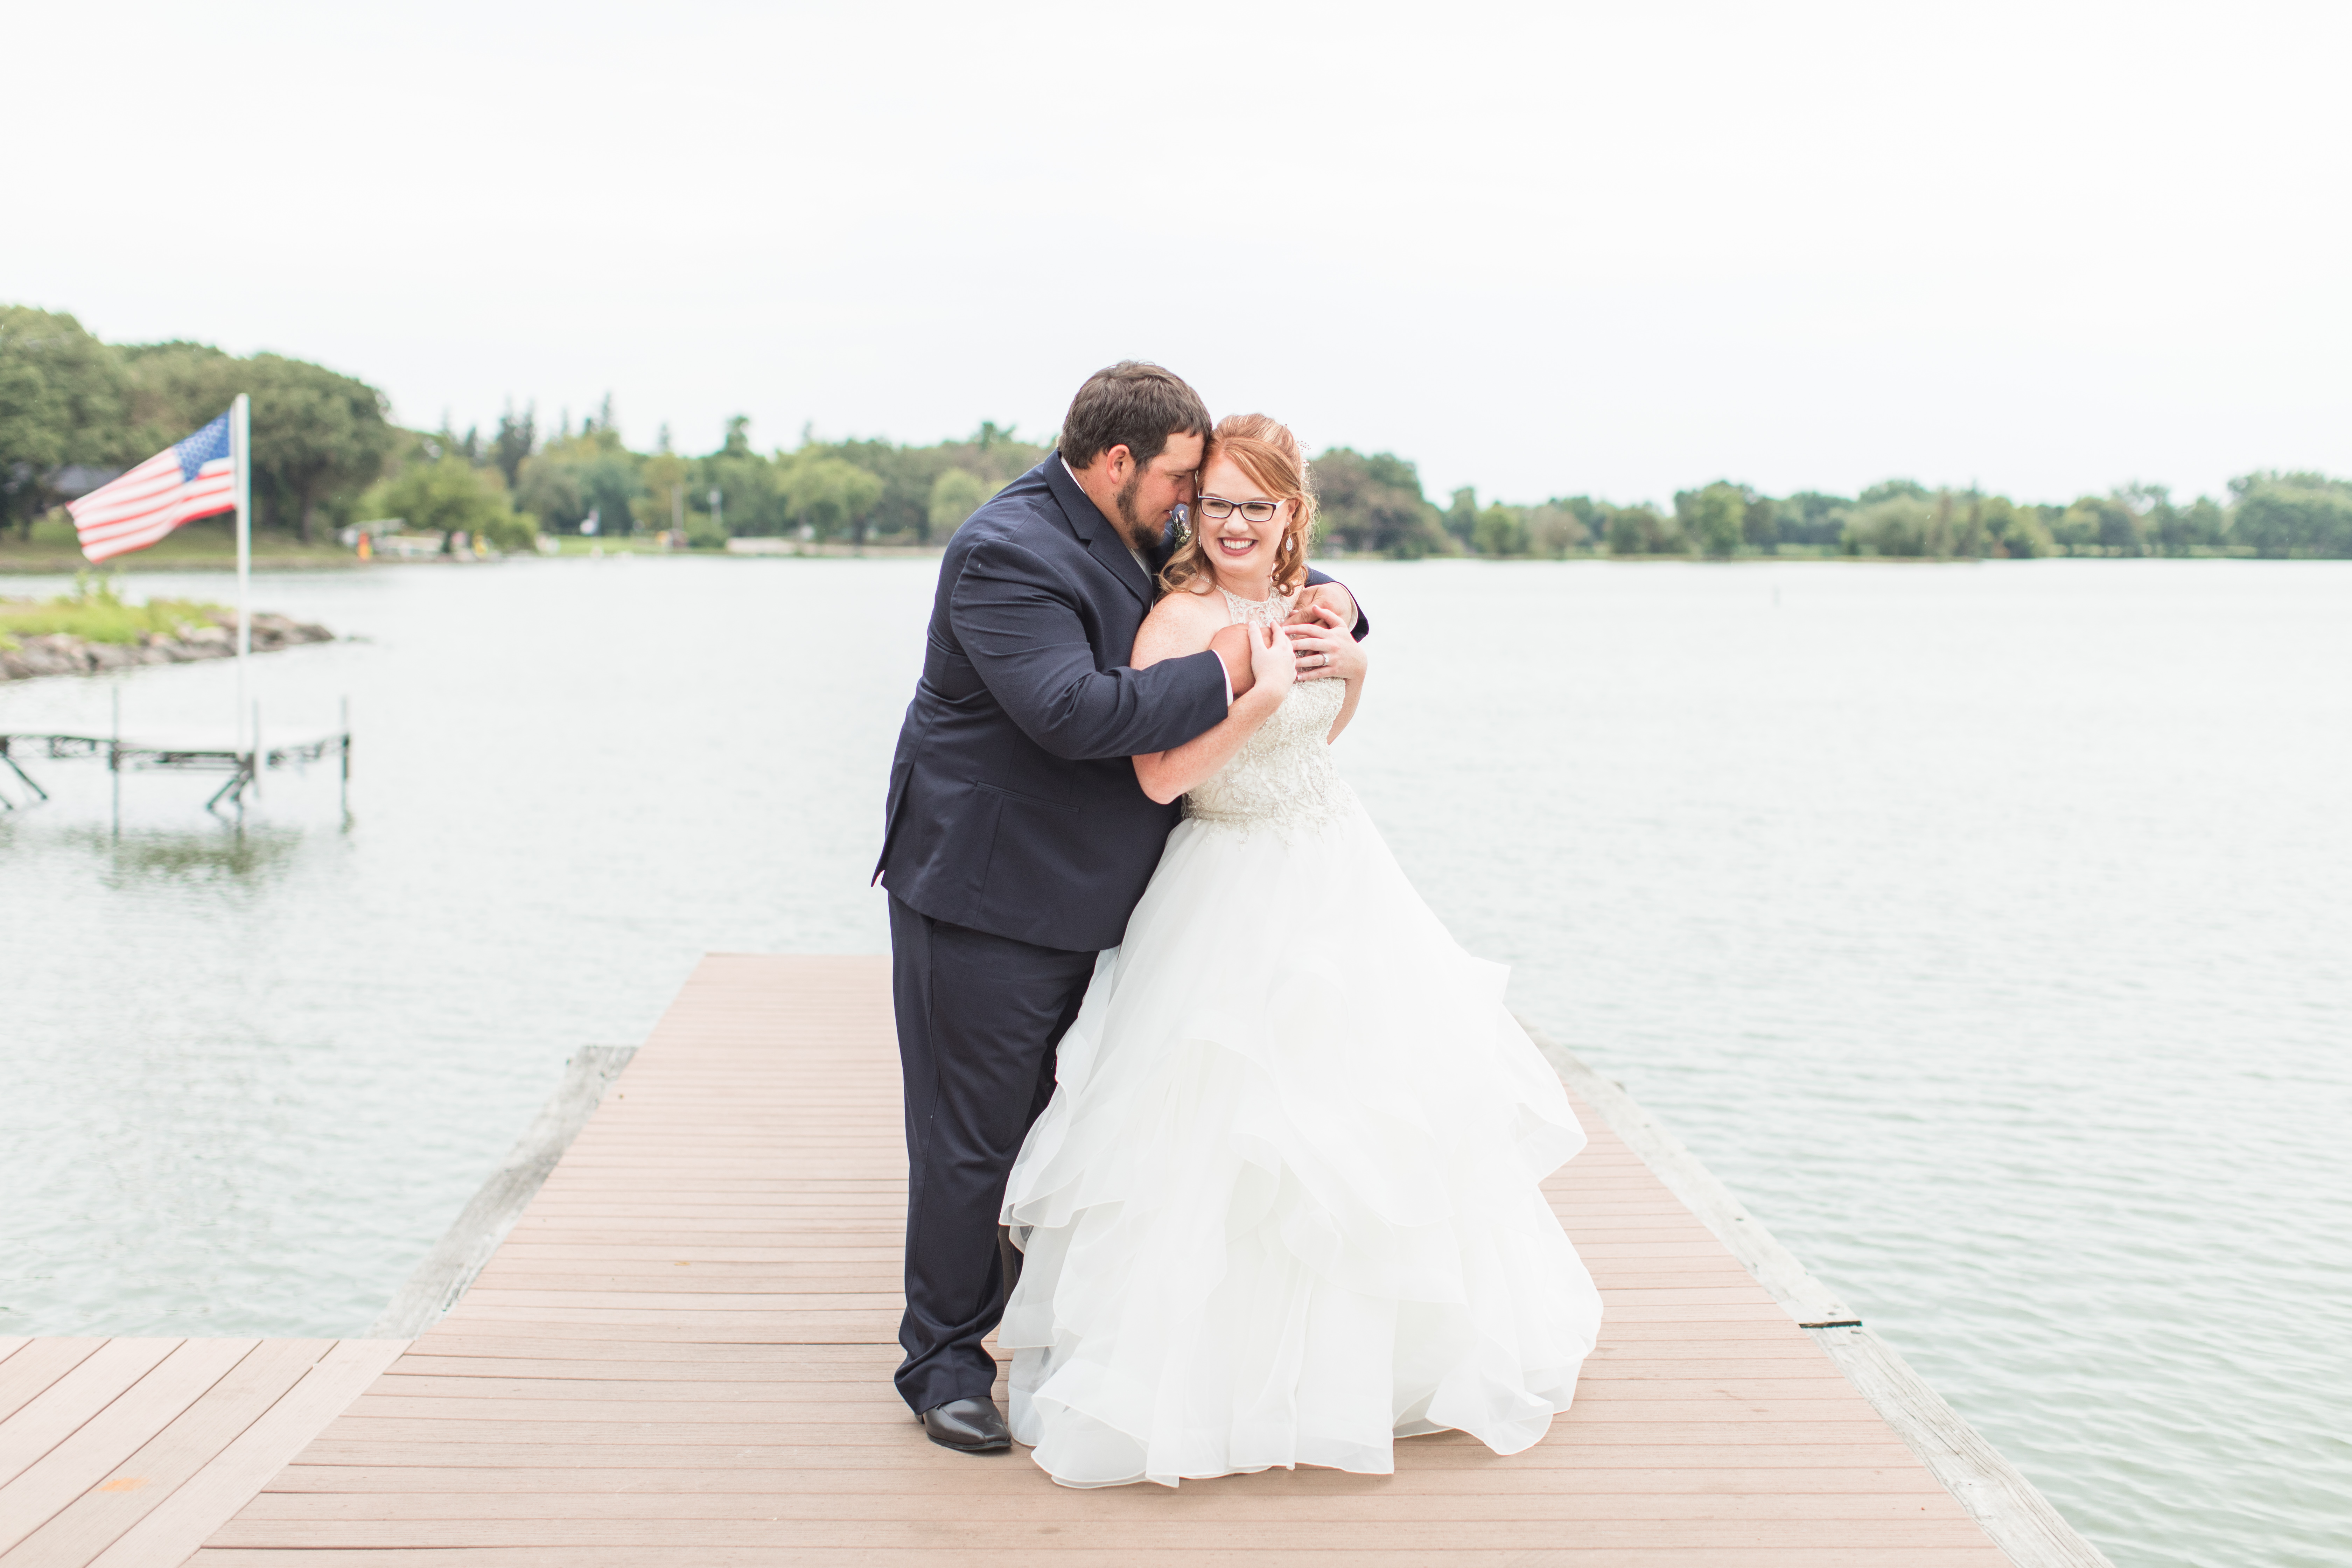 Wedding in Spencer, Iowa shot by Jessica Brees Photography